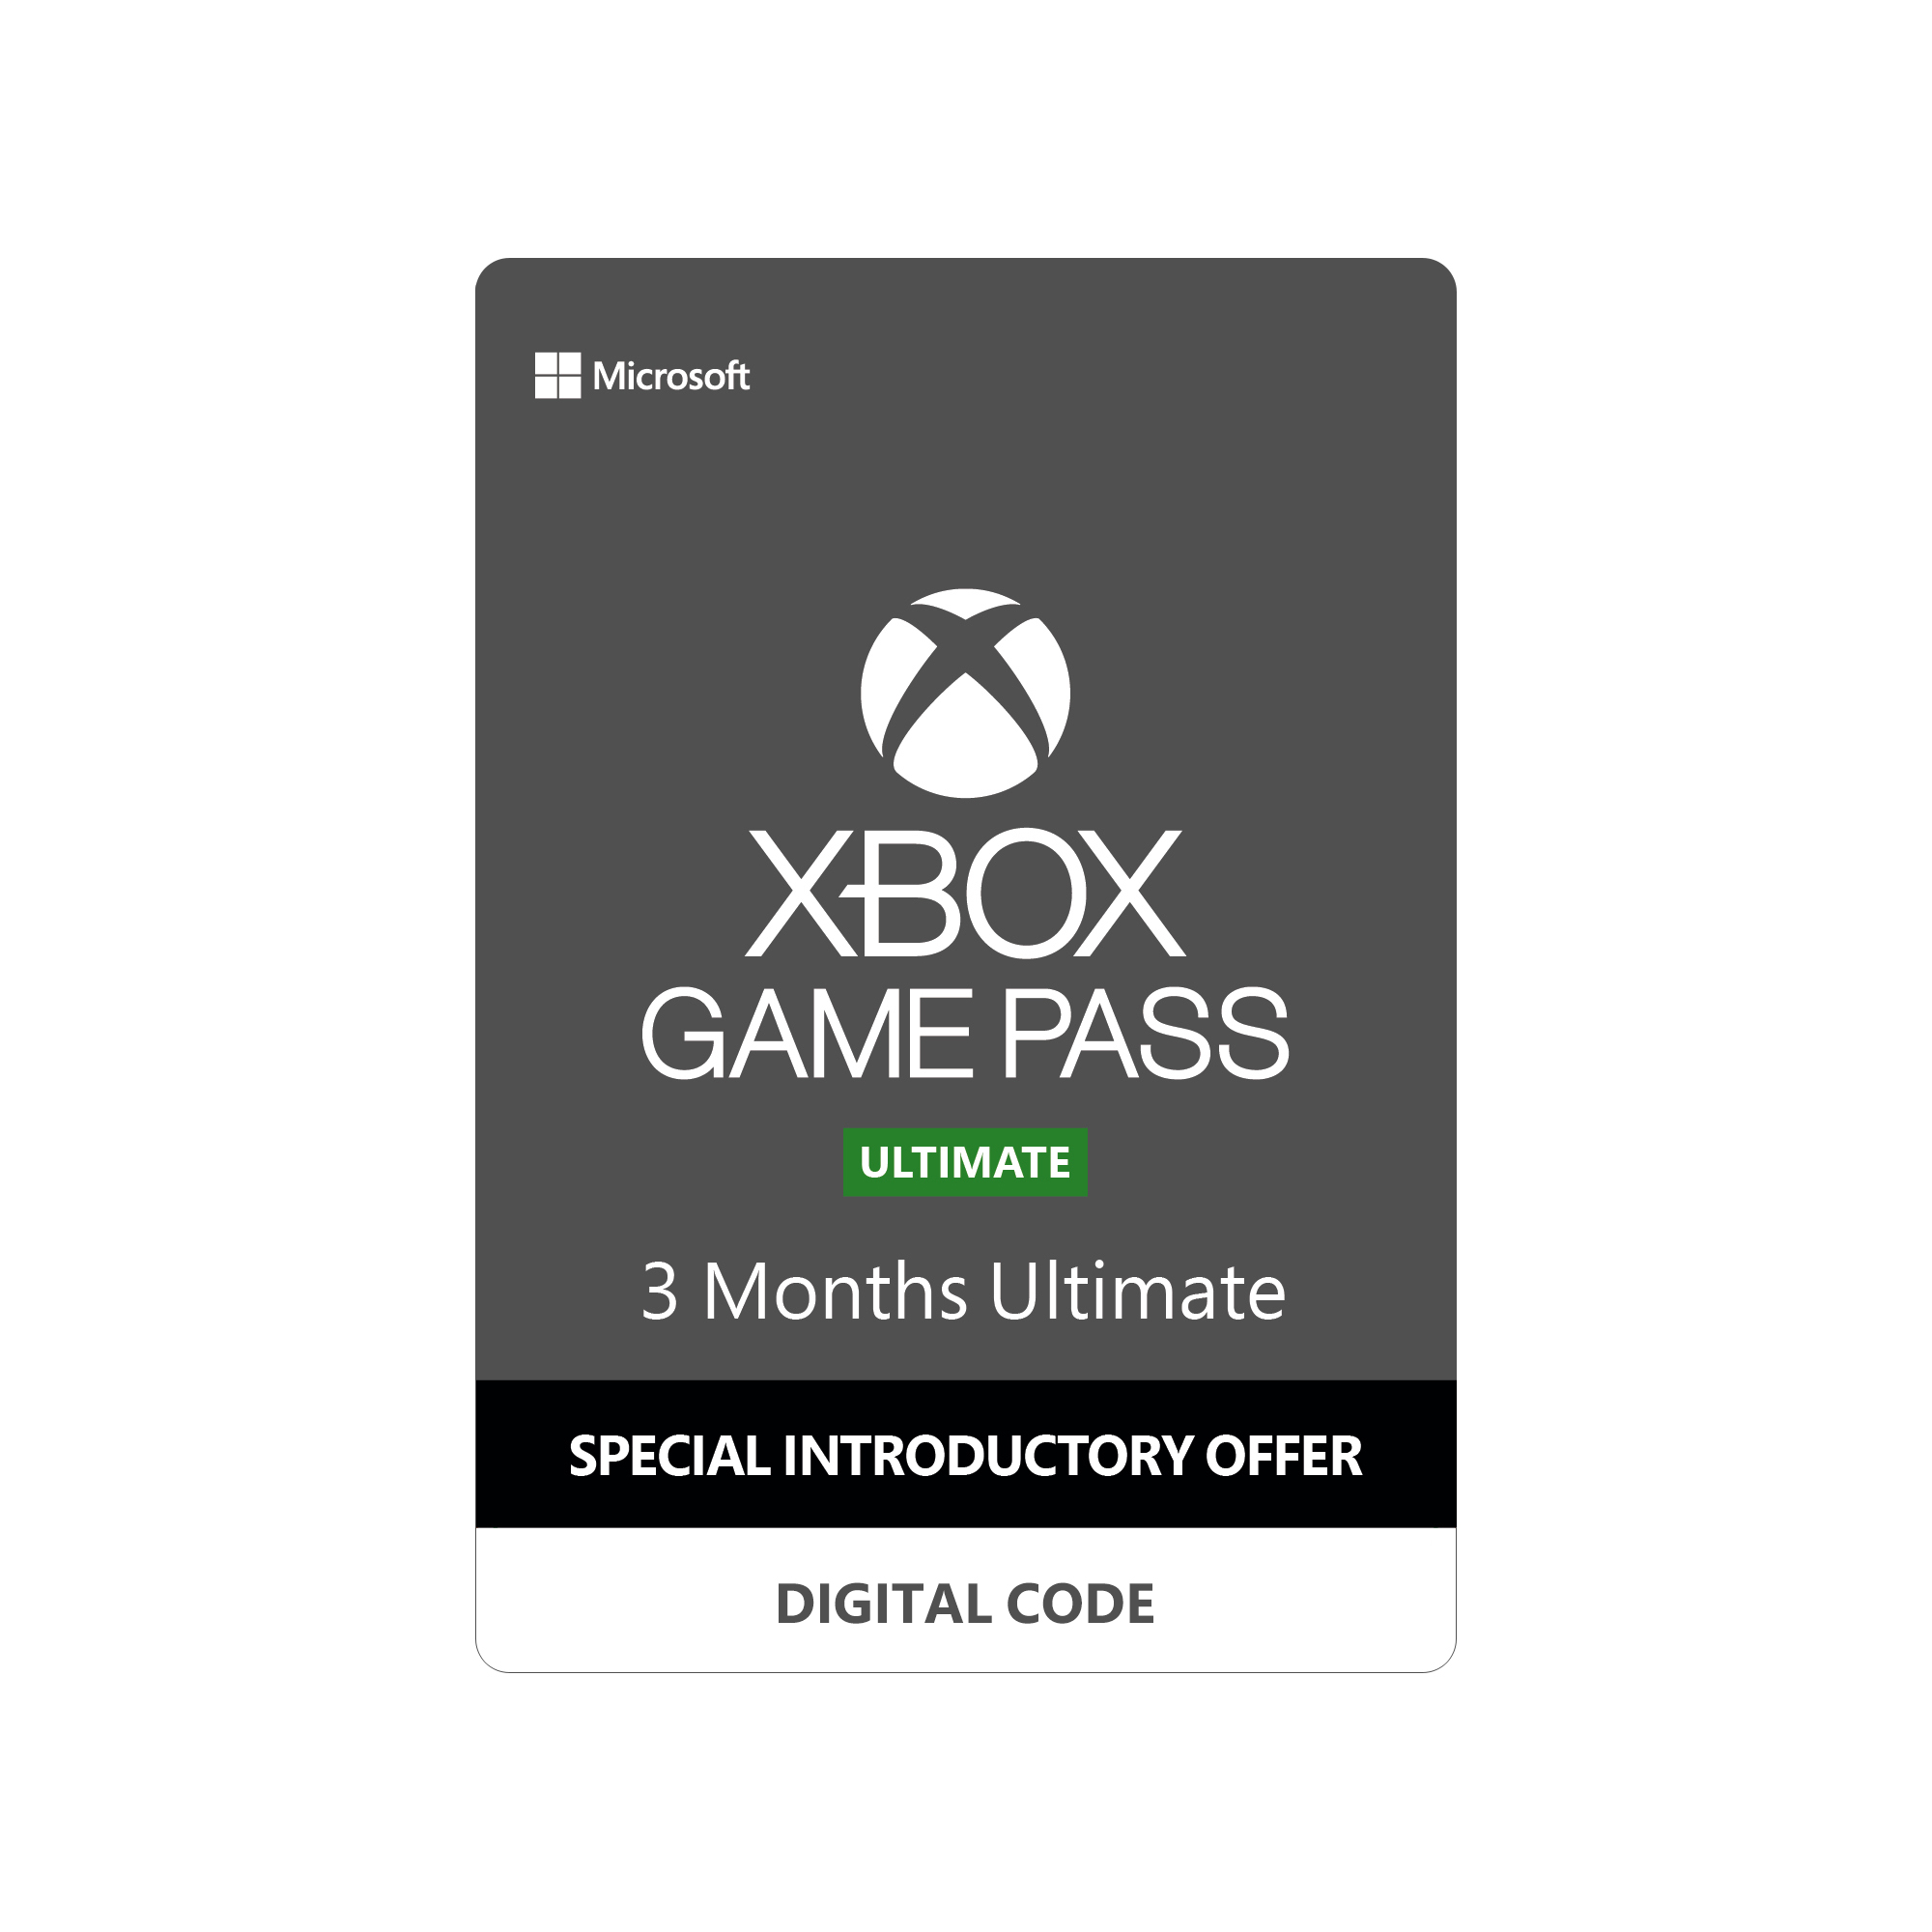 XBOX GAME PASS ULTIMATE